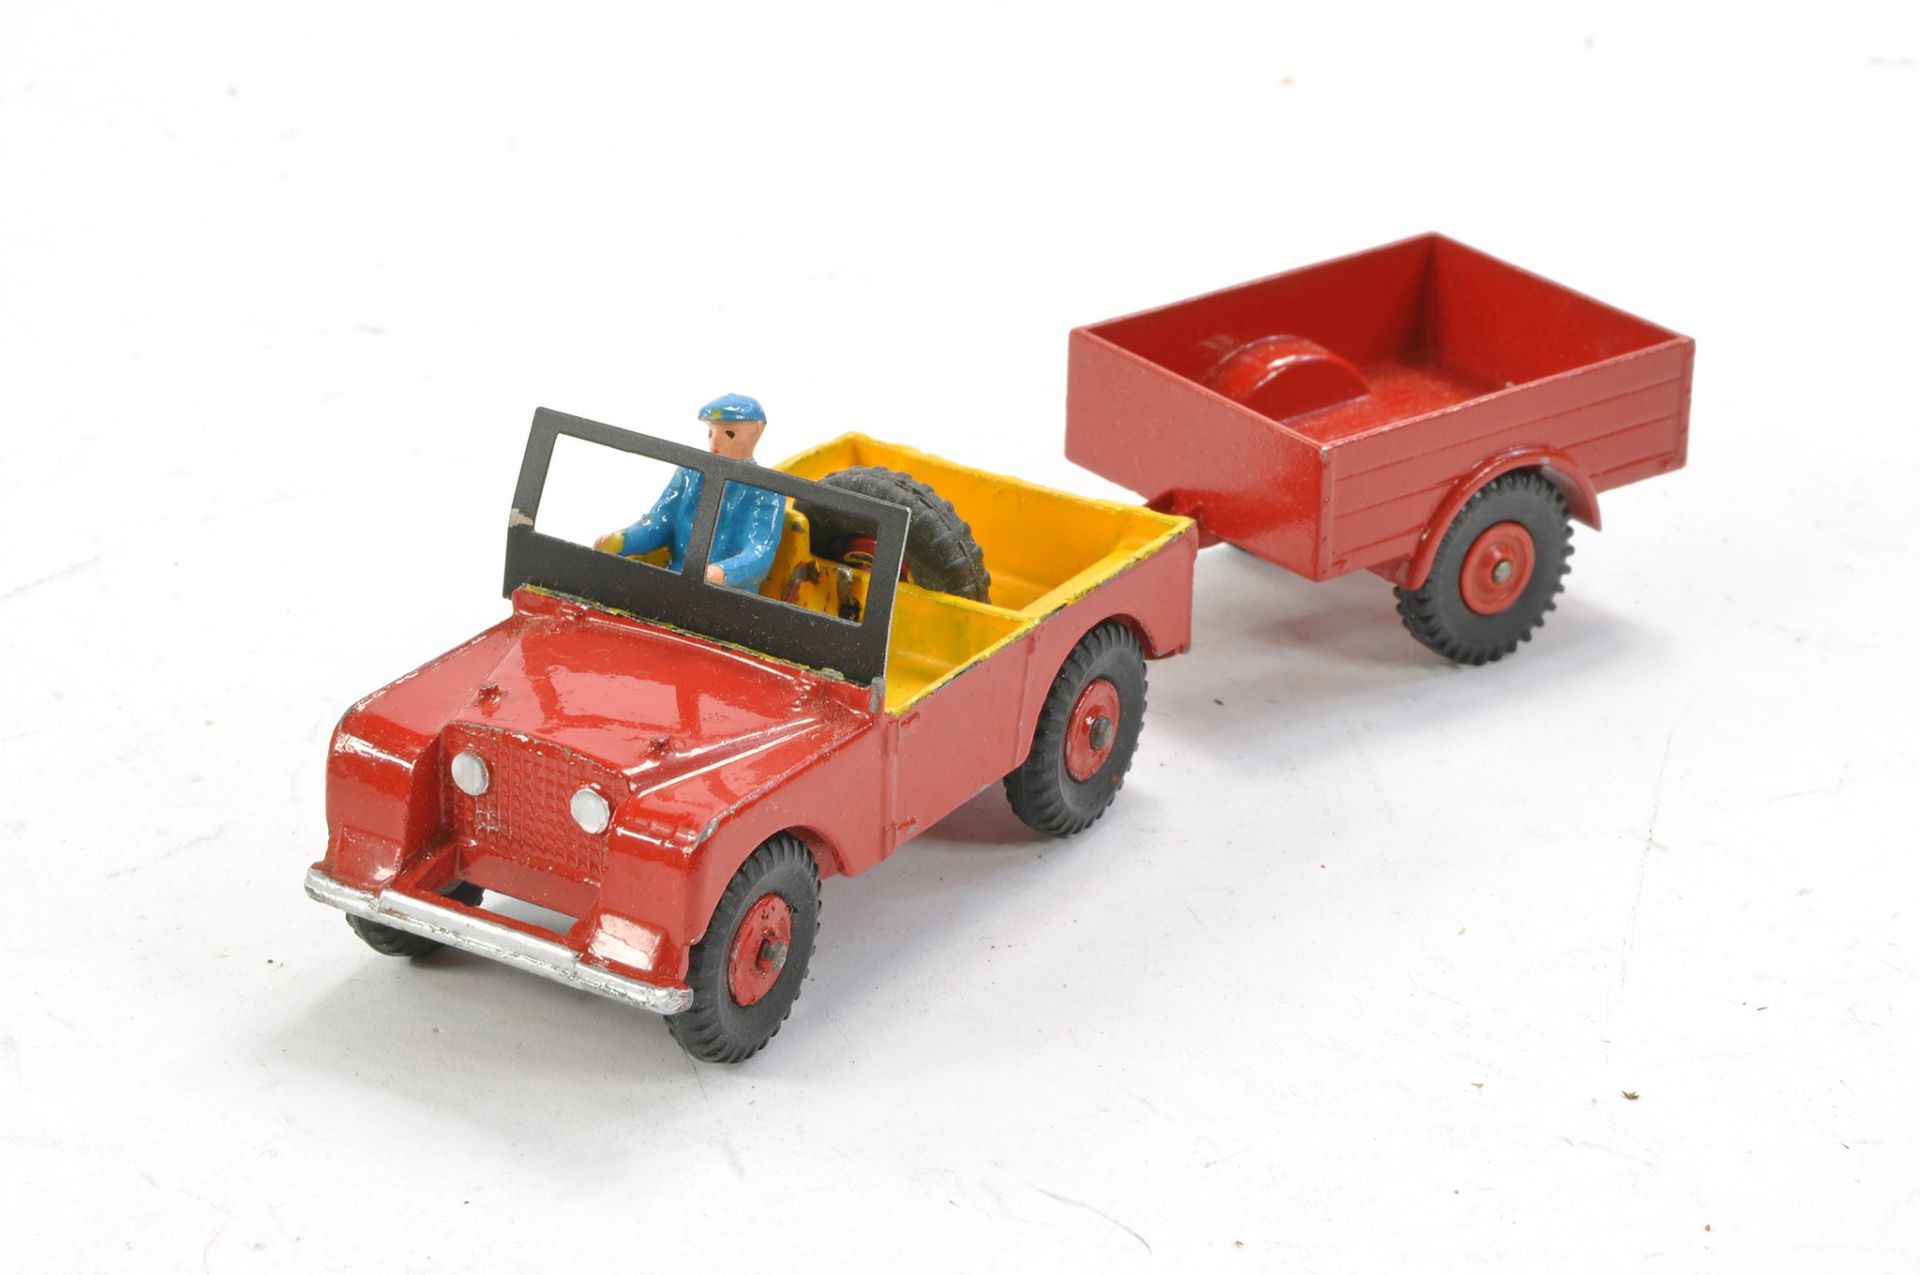 Dinky No. 340/341 Land Rover and Trailer. Red and yellow variant with blue driver. Land Rover